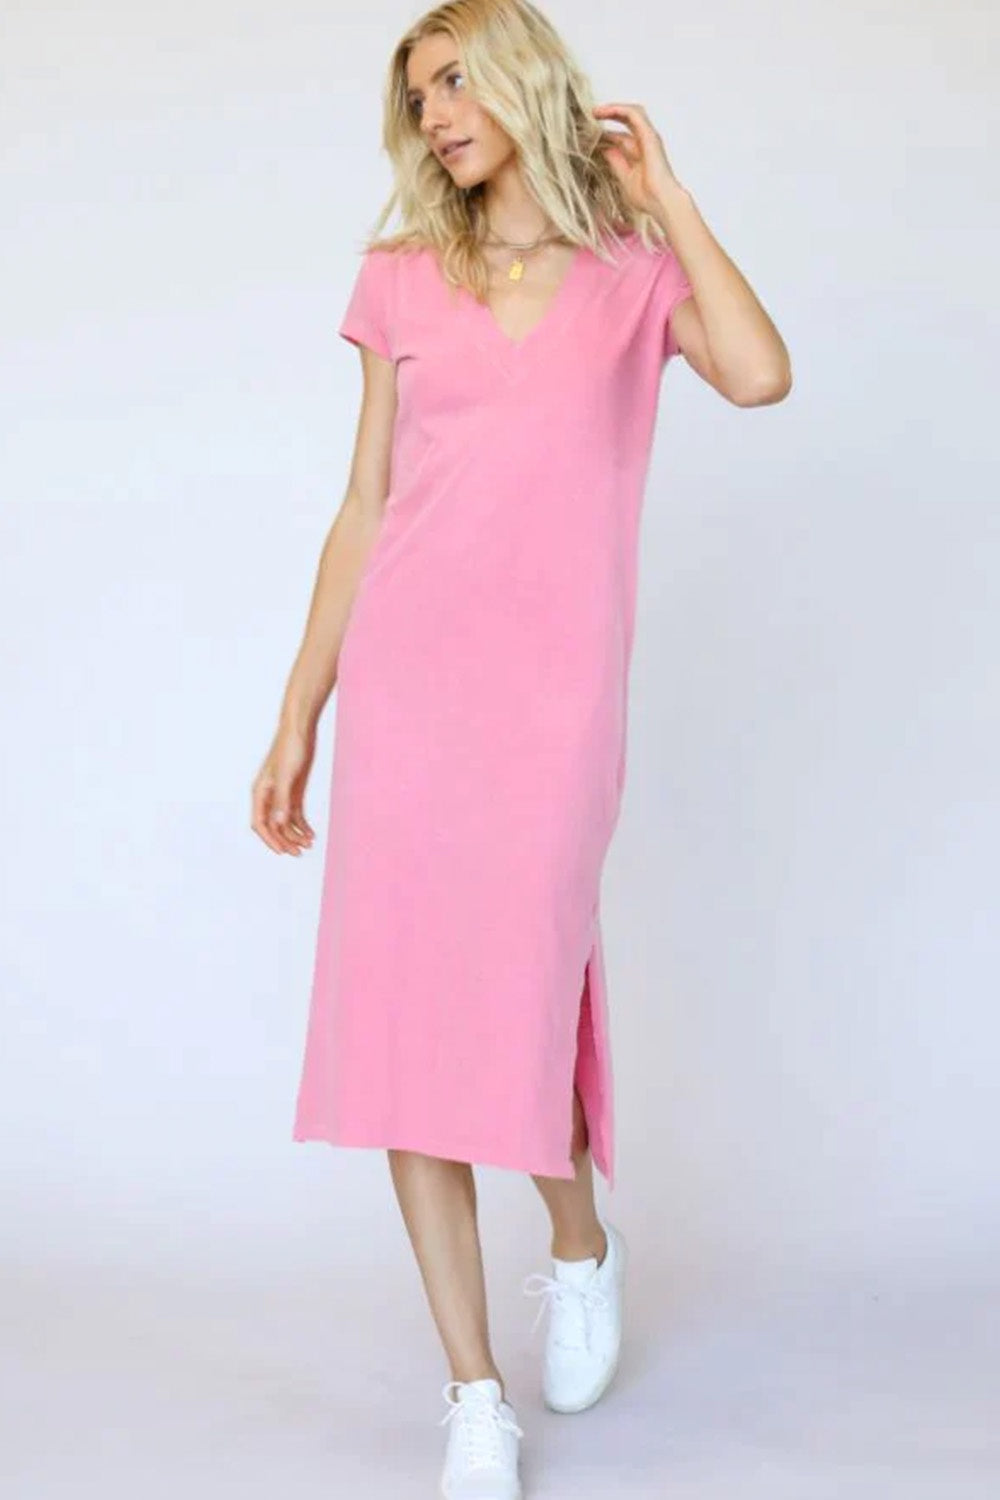 PERFECT WHITE TEE - ABBEY DRESS PINK WAS $199